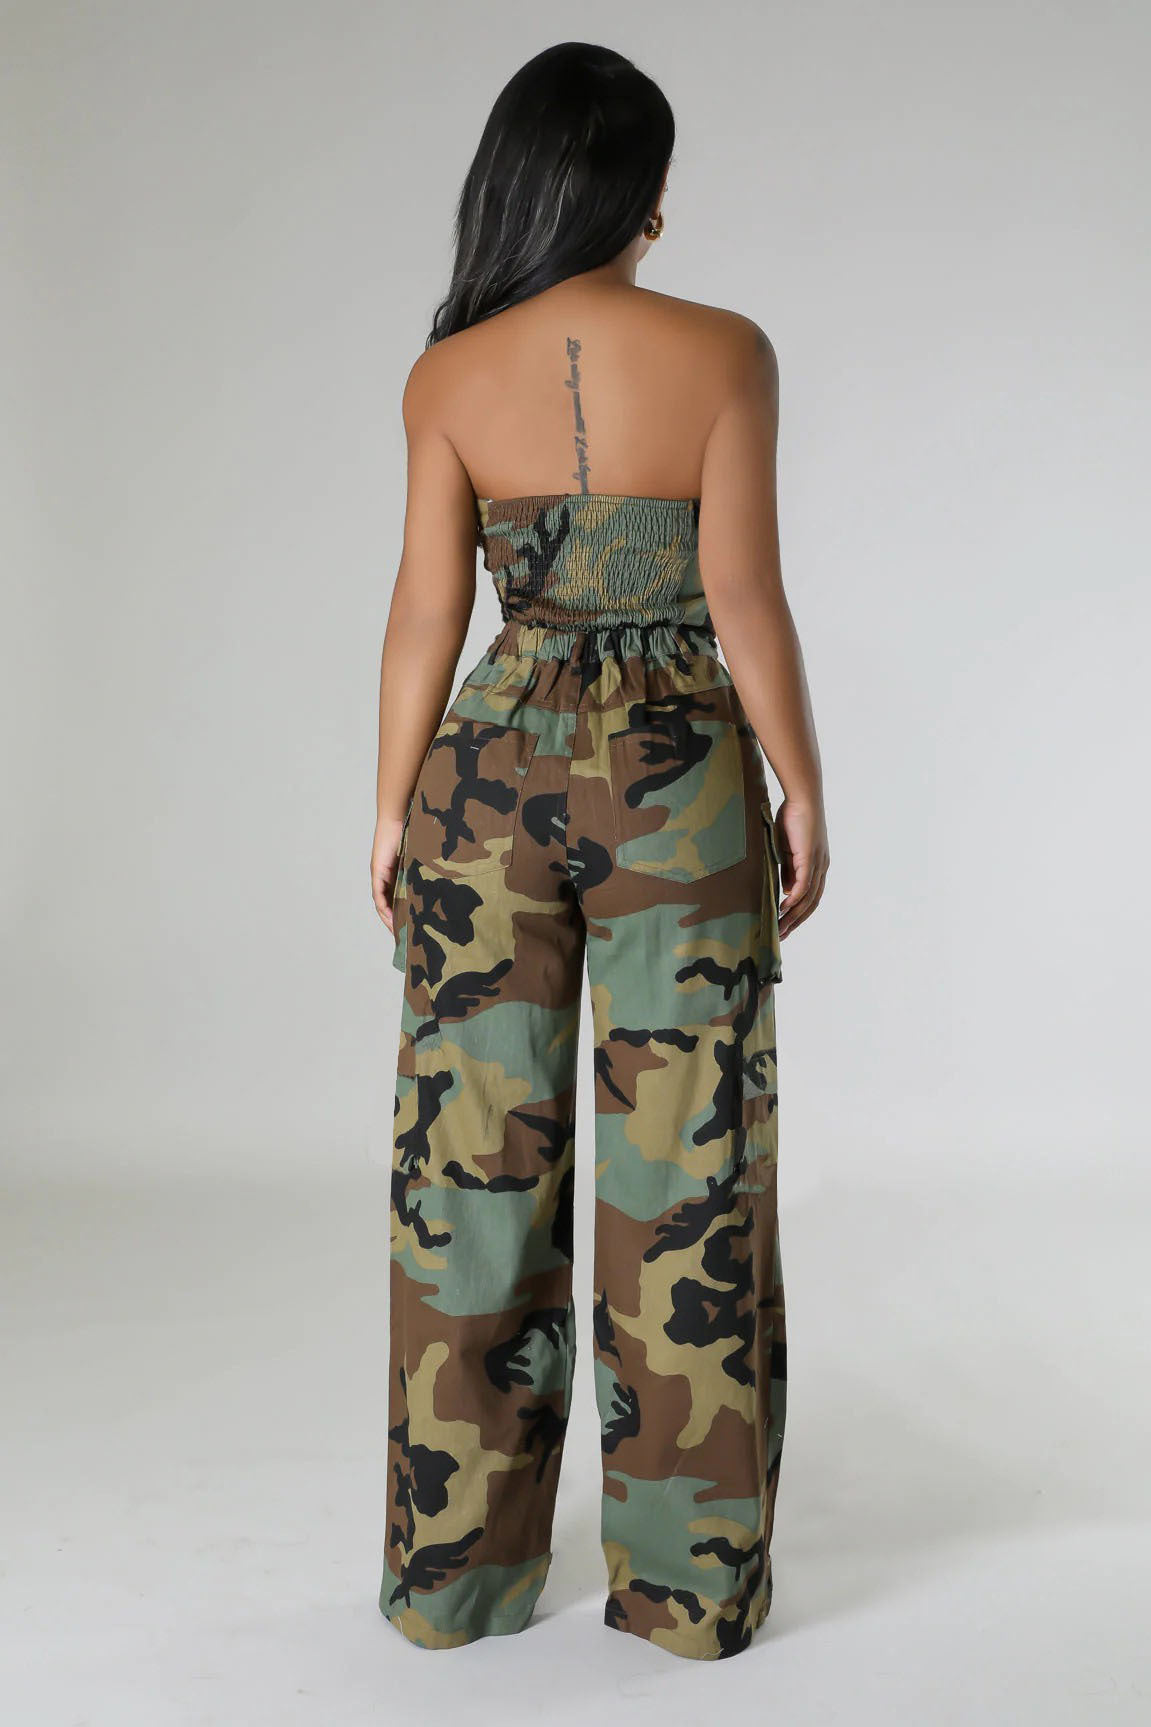 Camouflage Pocket Casual Pants Suit